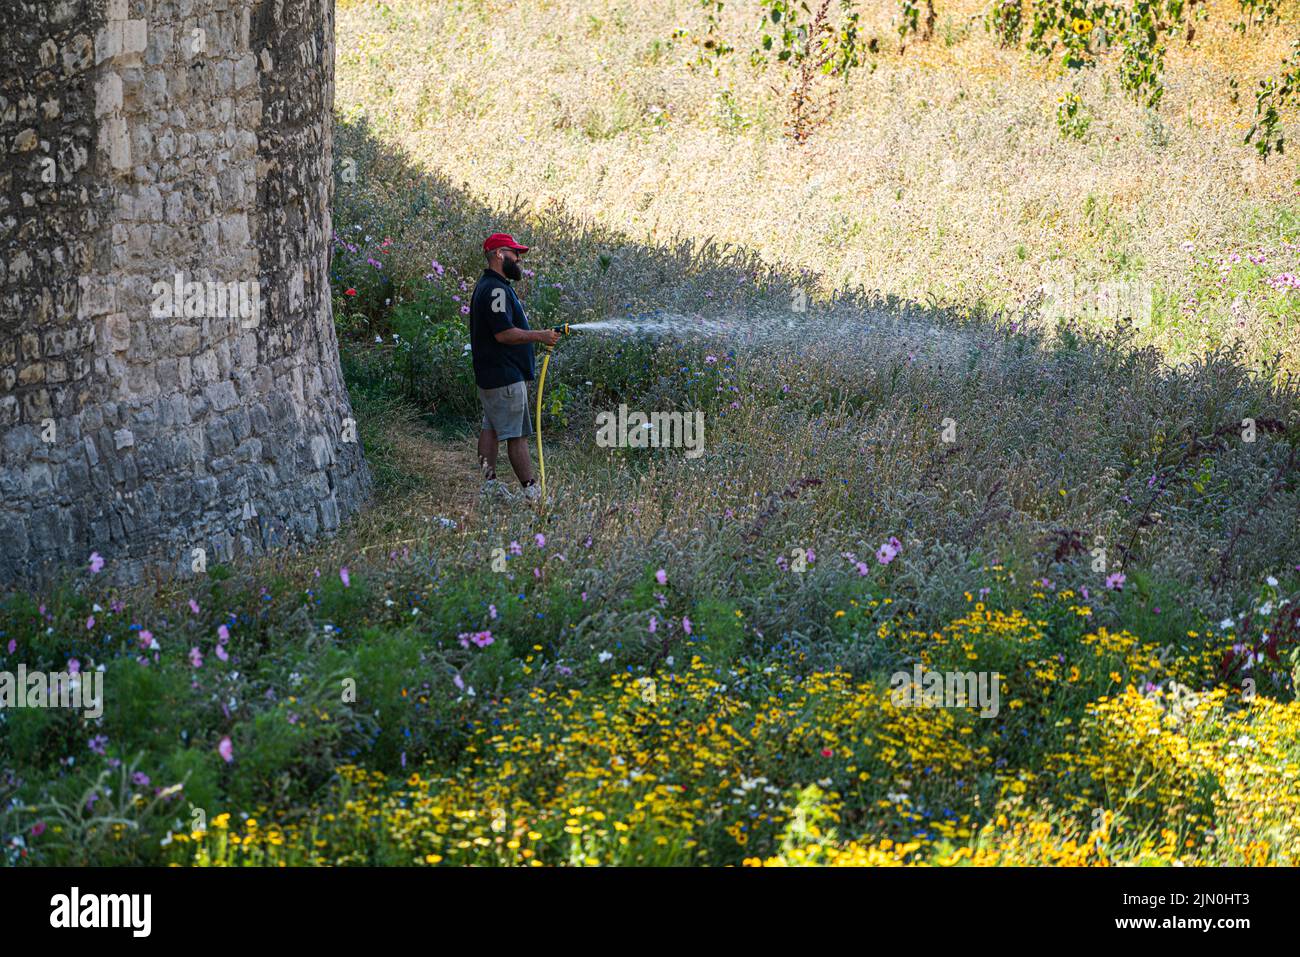 London, UK. 8 August 2022   A gardener watering the  Superbloom, a new permanent display of wildflowers in the moat of the Tower of London, grown from over 20 million seeds from 29 flower species which were sown to celebrate the Queen’s Platinum Jubilee. The flowers were chosen to attract a variety of pollinators to create a new biodiverse habitat..Credit. amer ghazzal/Alamy Live News Stock Photo